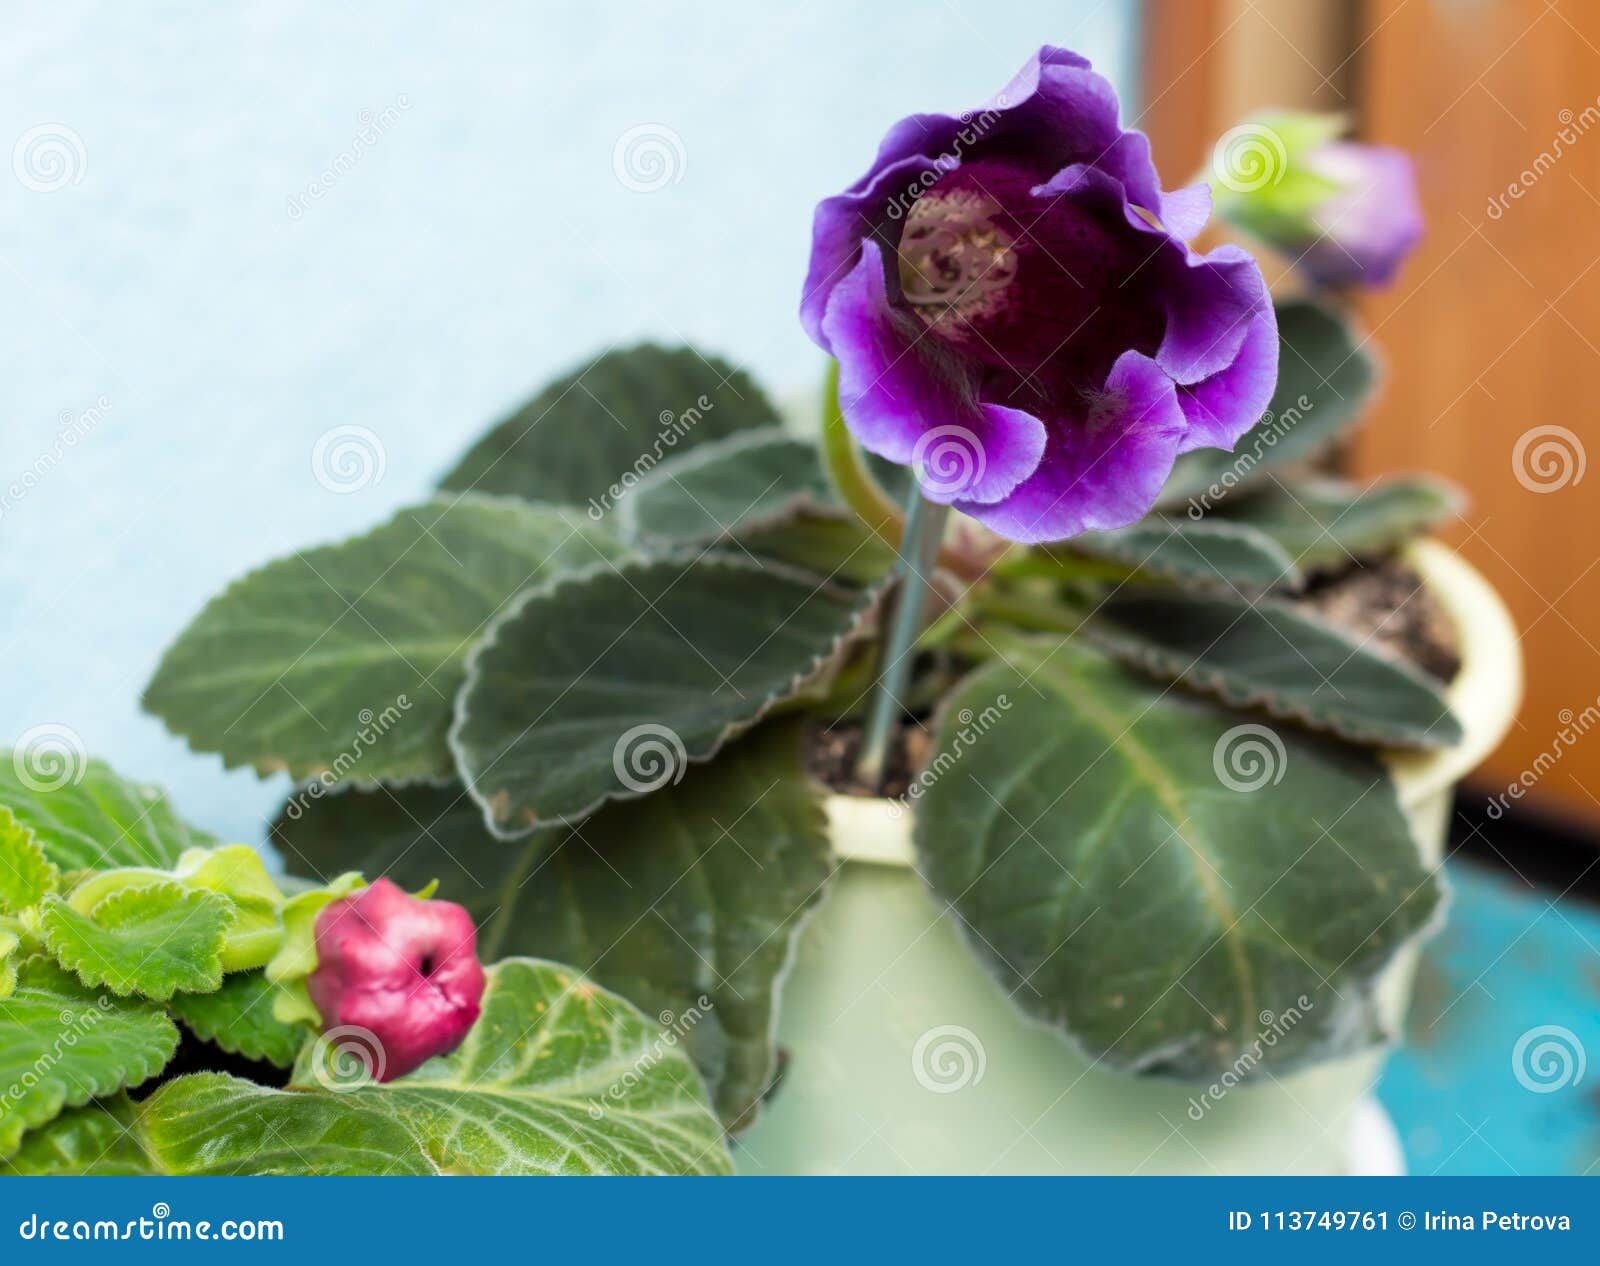 Flowers of Violet Gloxinia in a Pot Stock Image - Image of fragility,  flora: 113749761